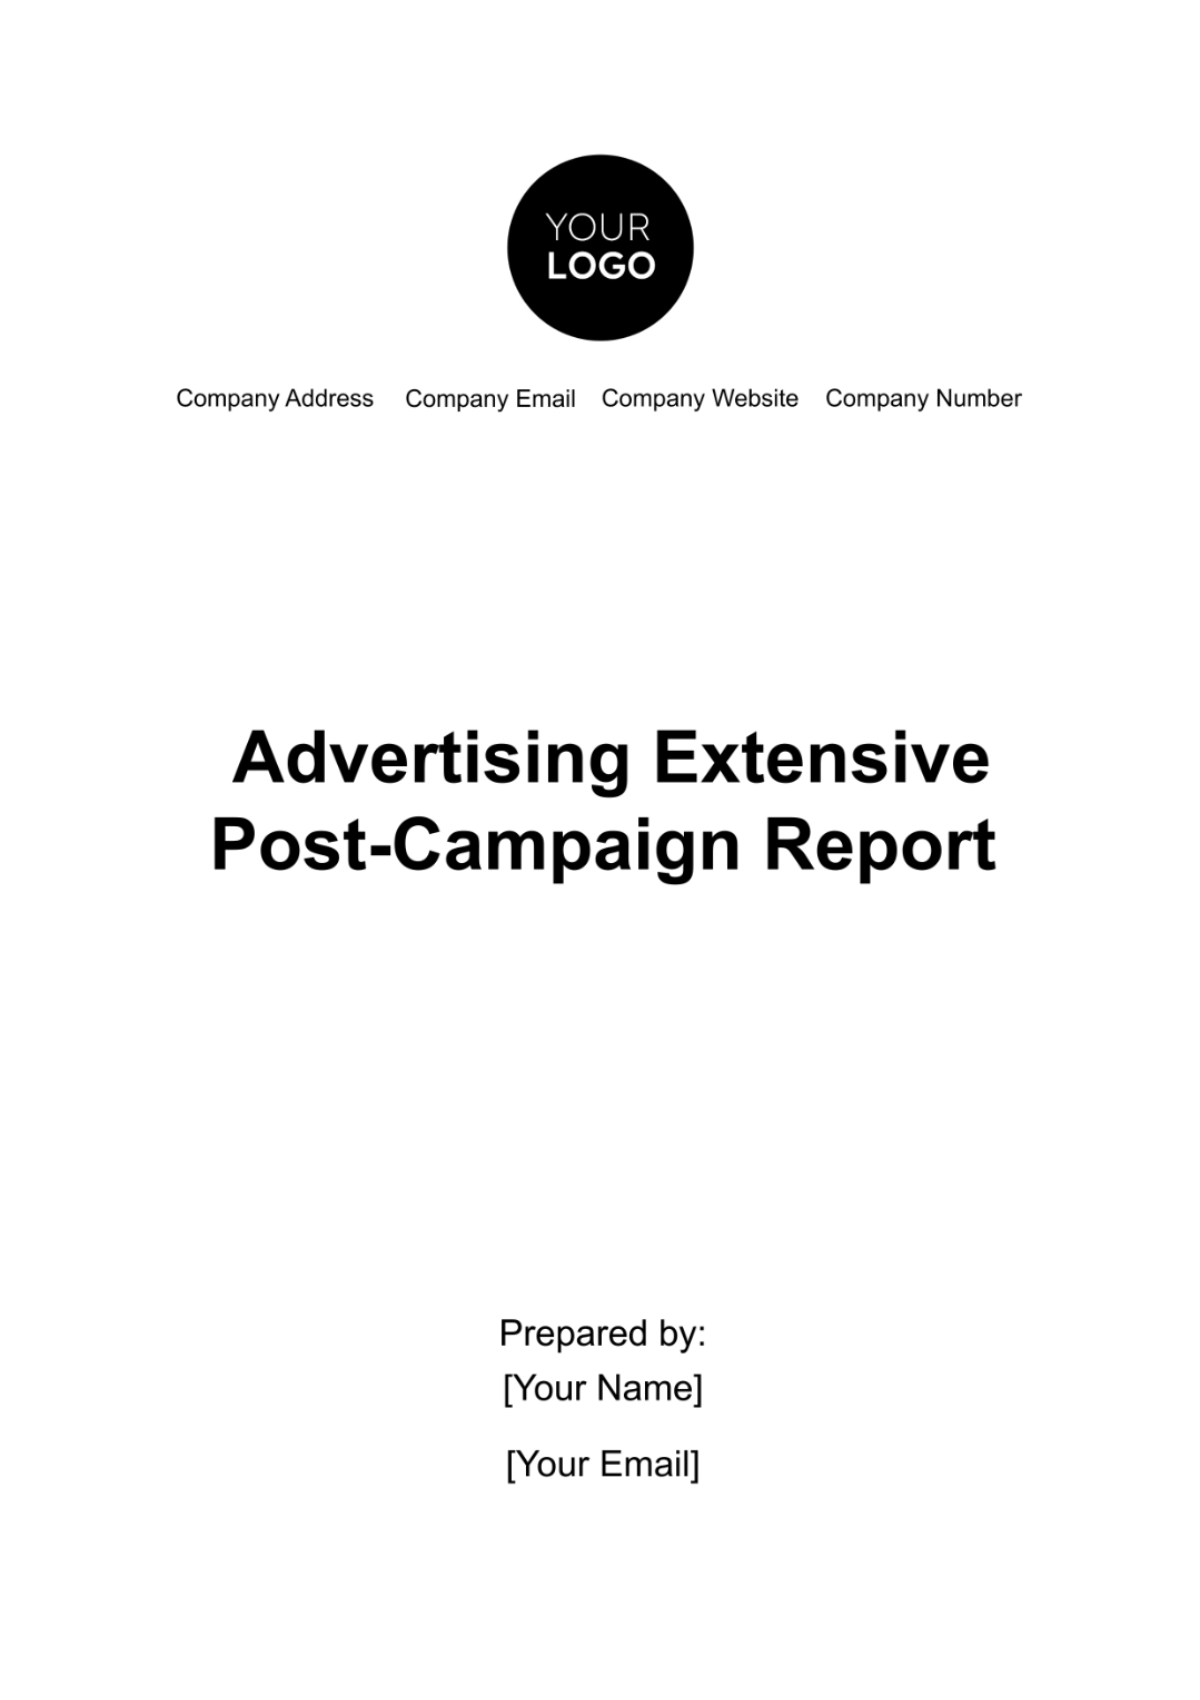 Free Advertising Extensive Post-Campaign Report Template